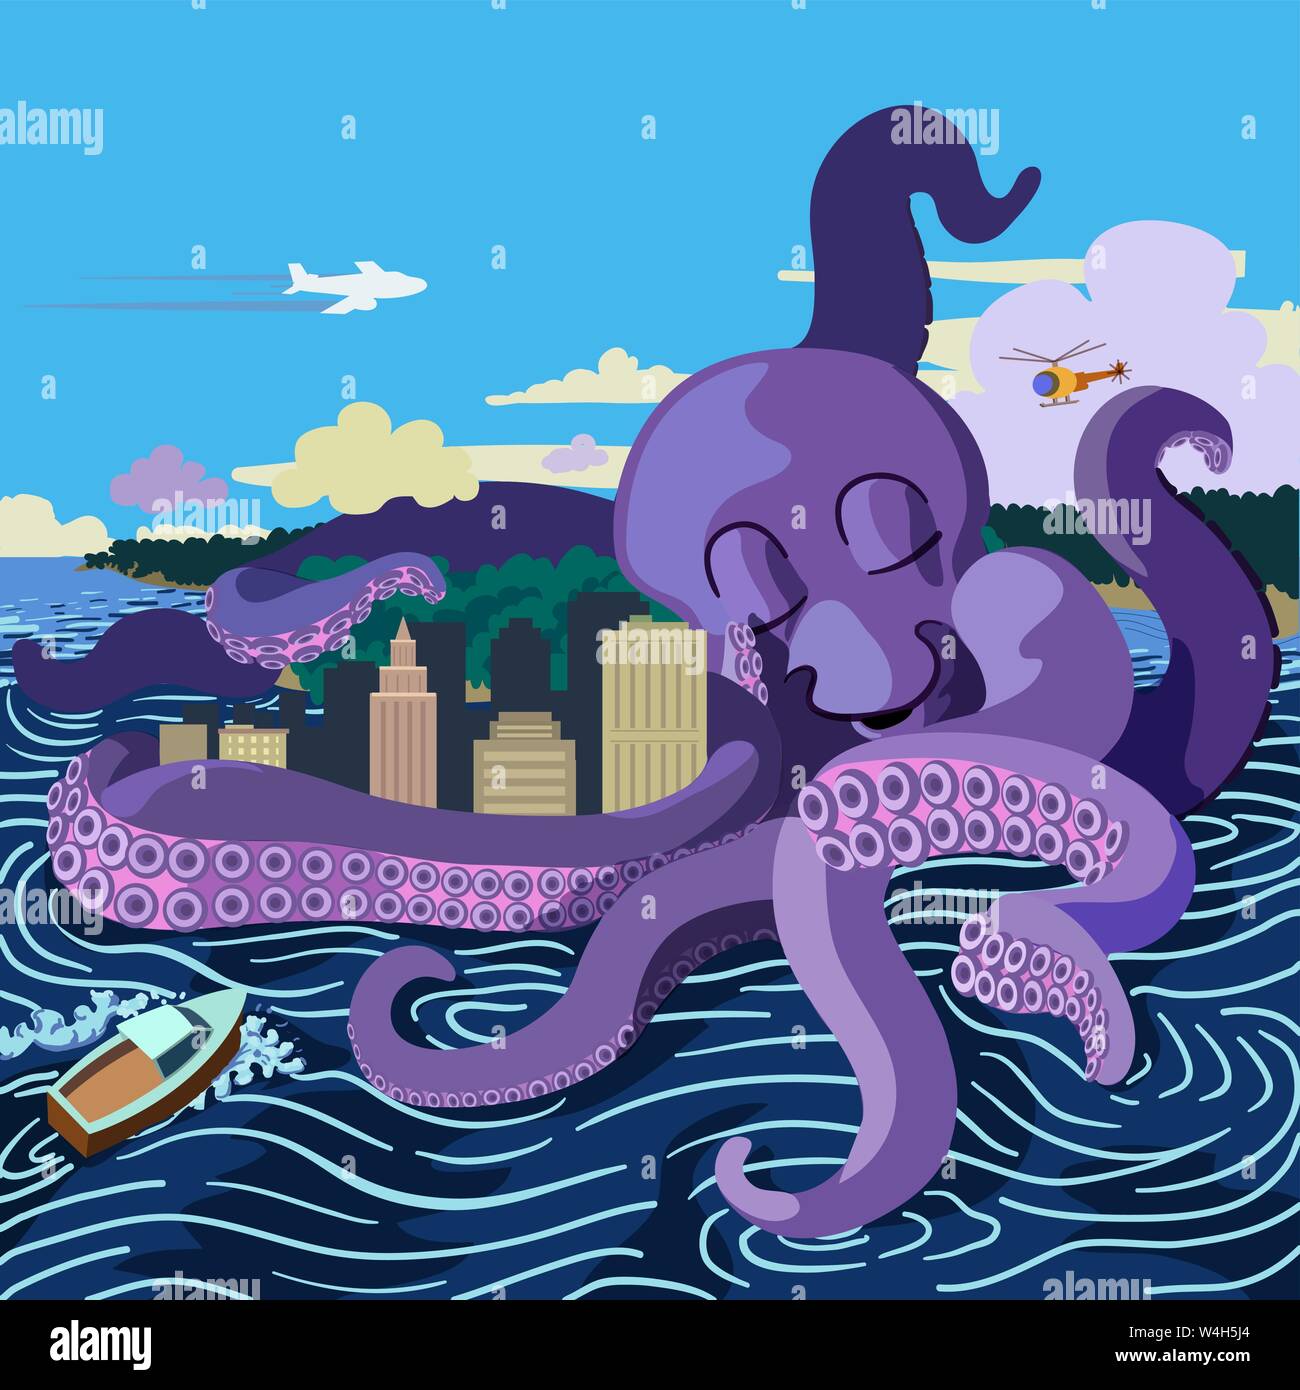 A giant octopus hugging a city creates turbulent waters as a jet airliners flies by, a helicopter looks on and a boat rashes against the waves. Stock Vector